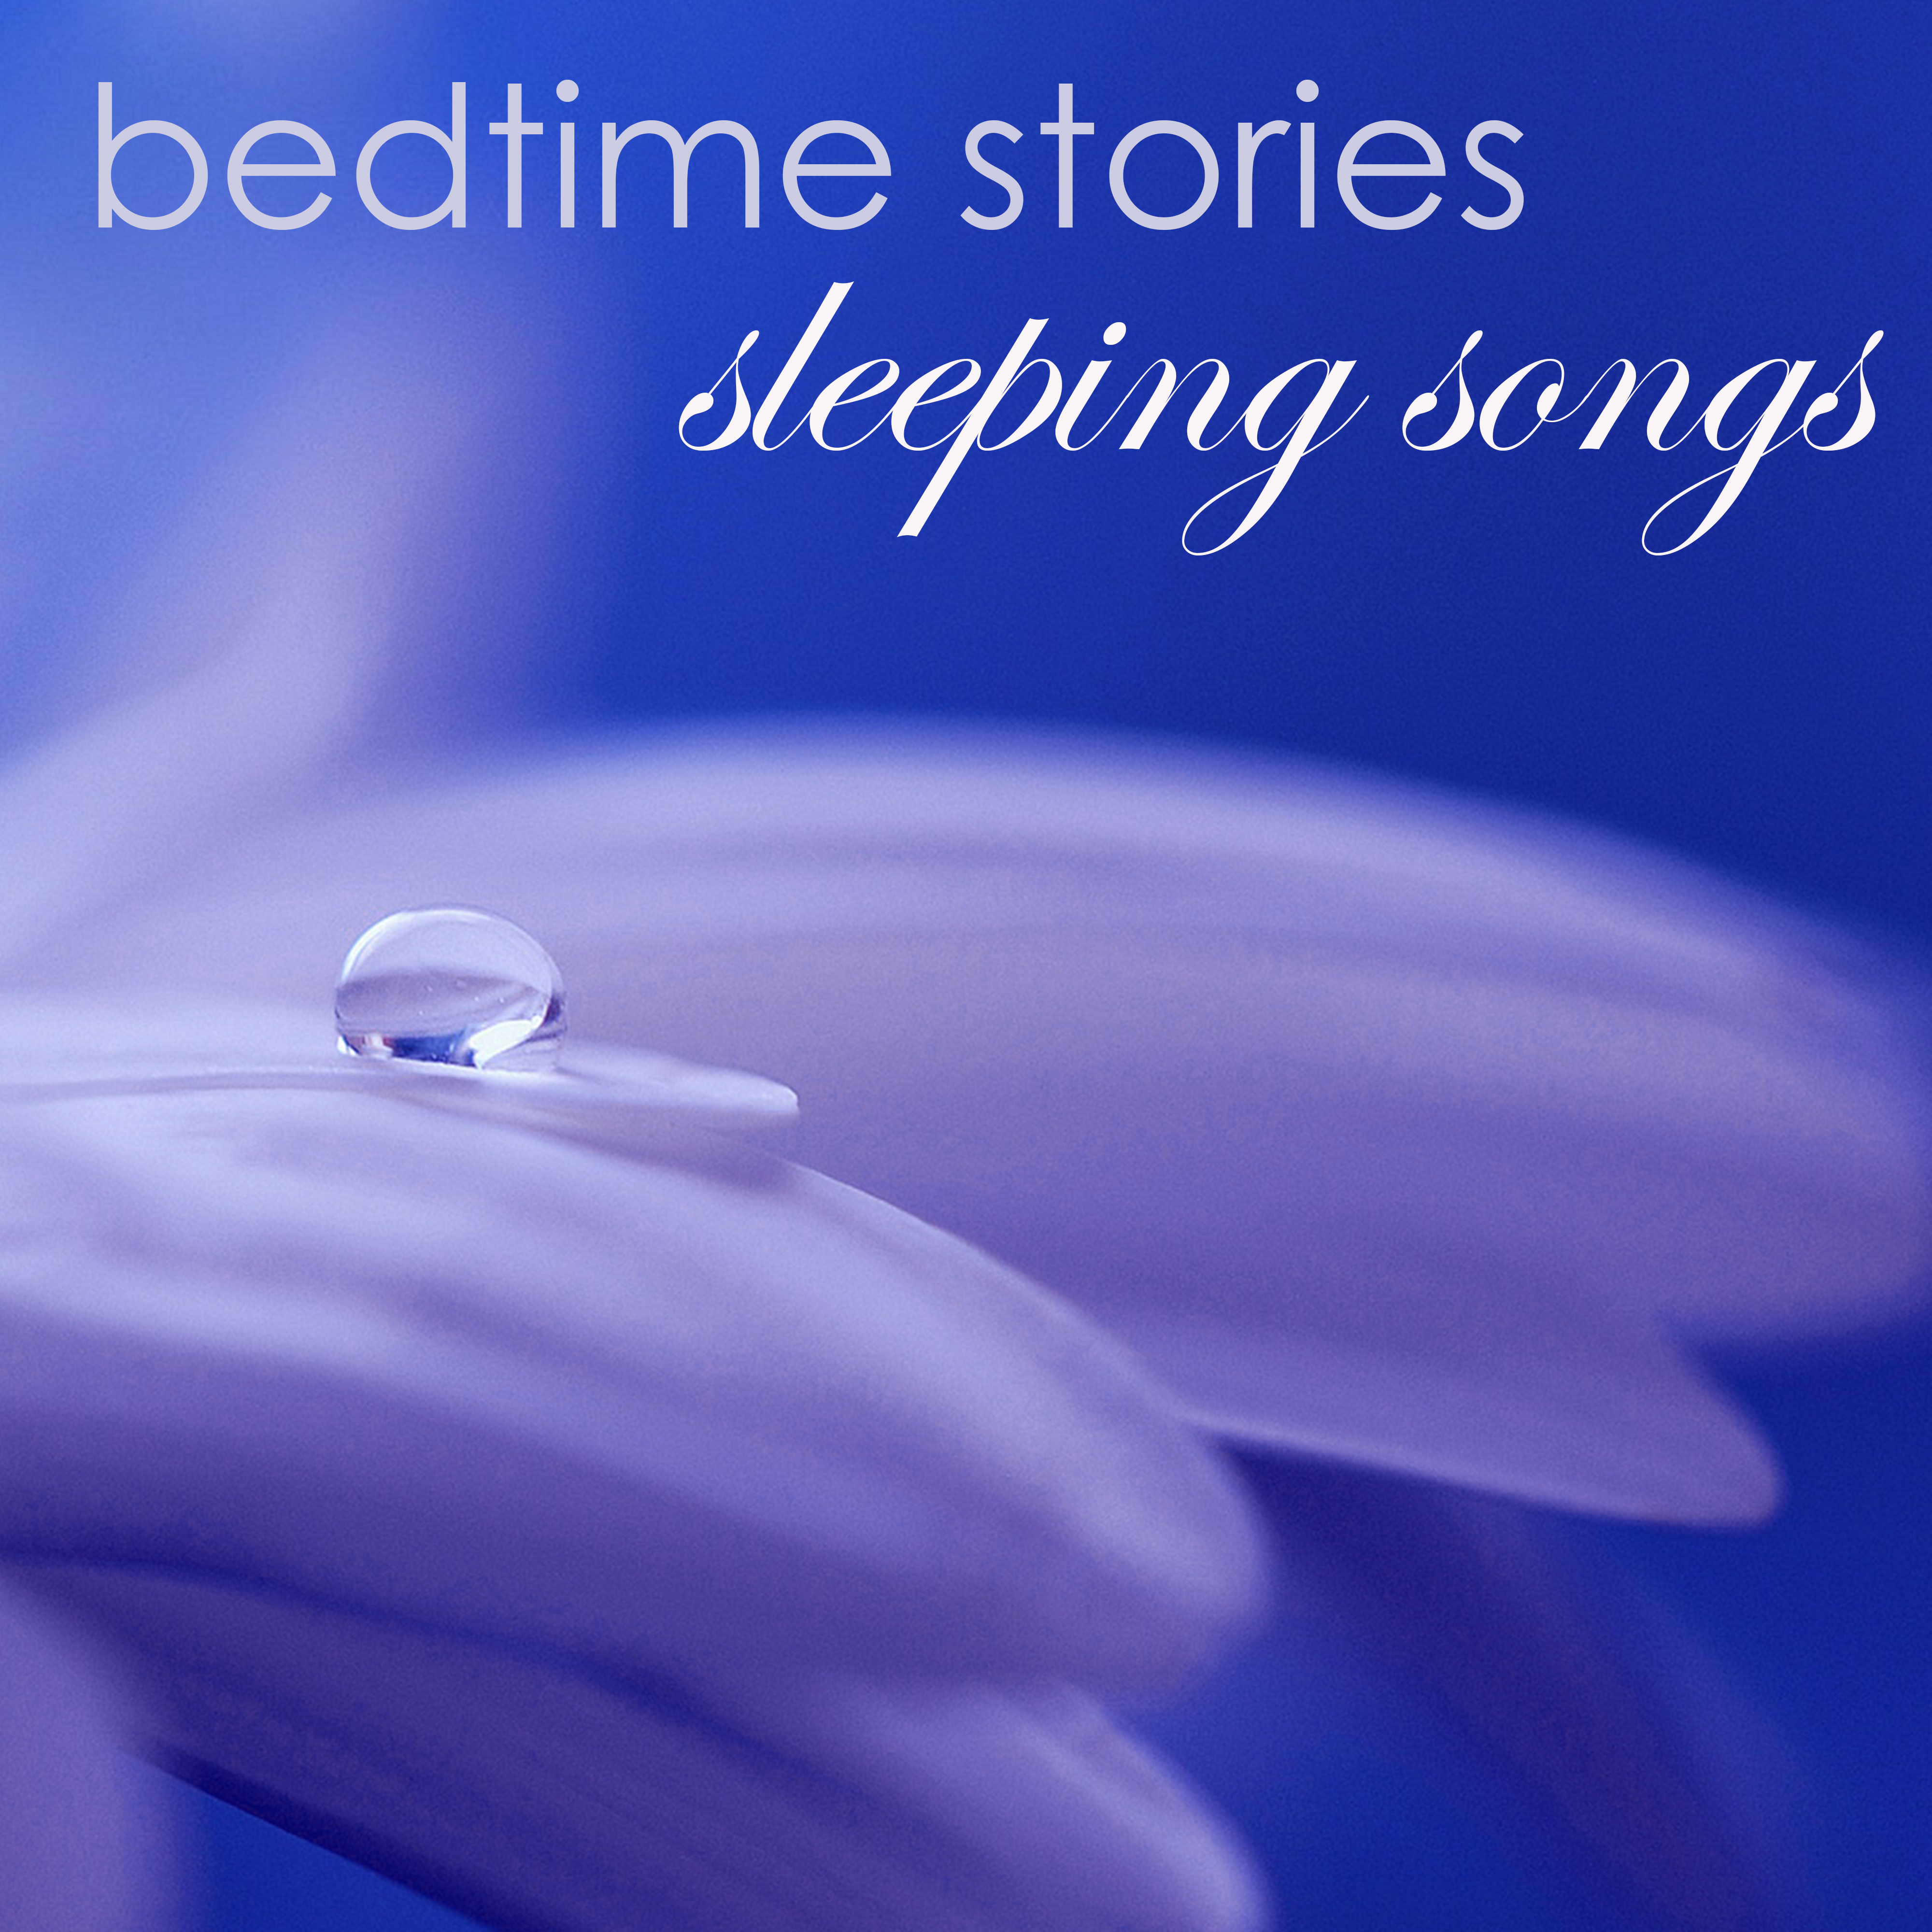 Bedtime Stories Sleeping Songs  Soft Calming Sleep Music with Relaxing Nature Sounds for a Good Night Sleep